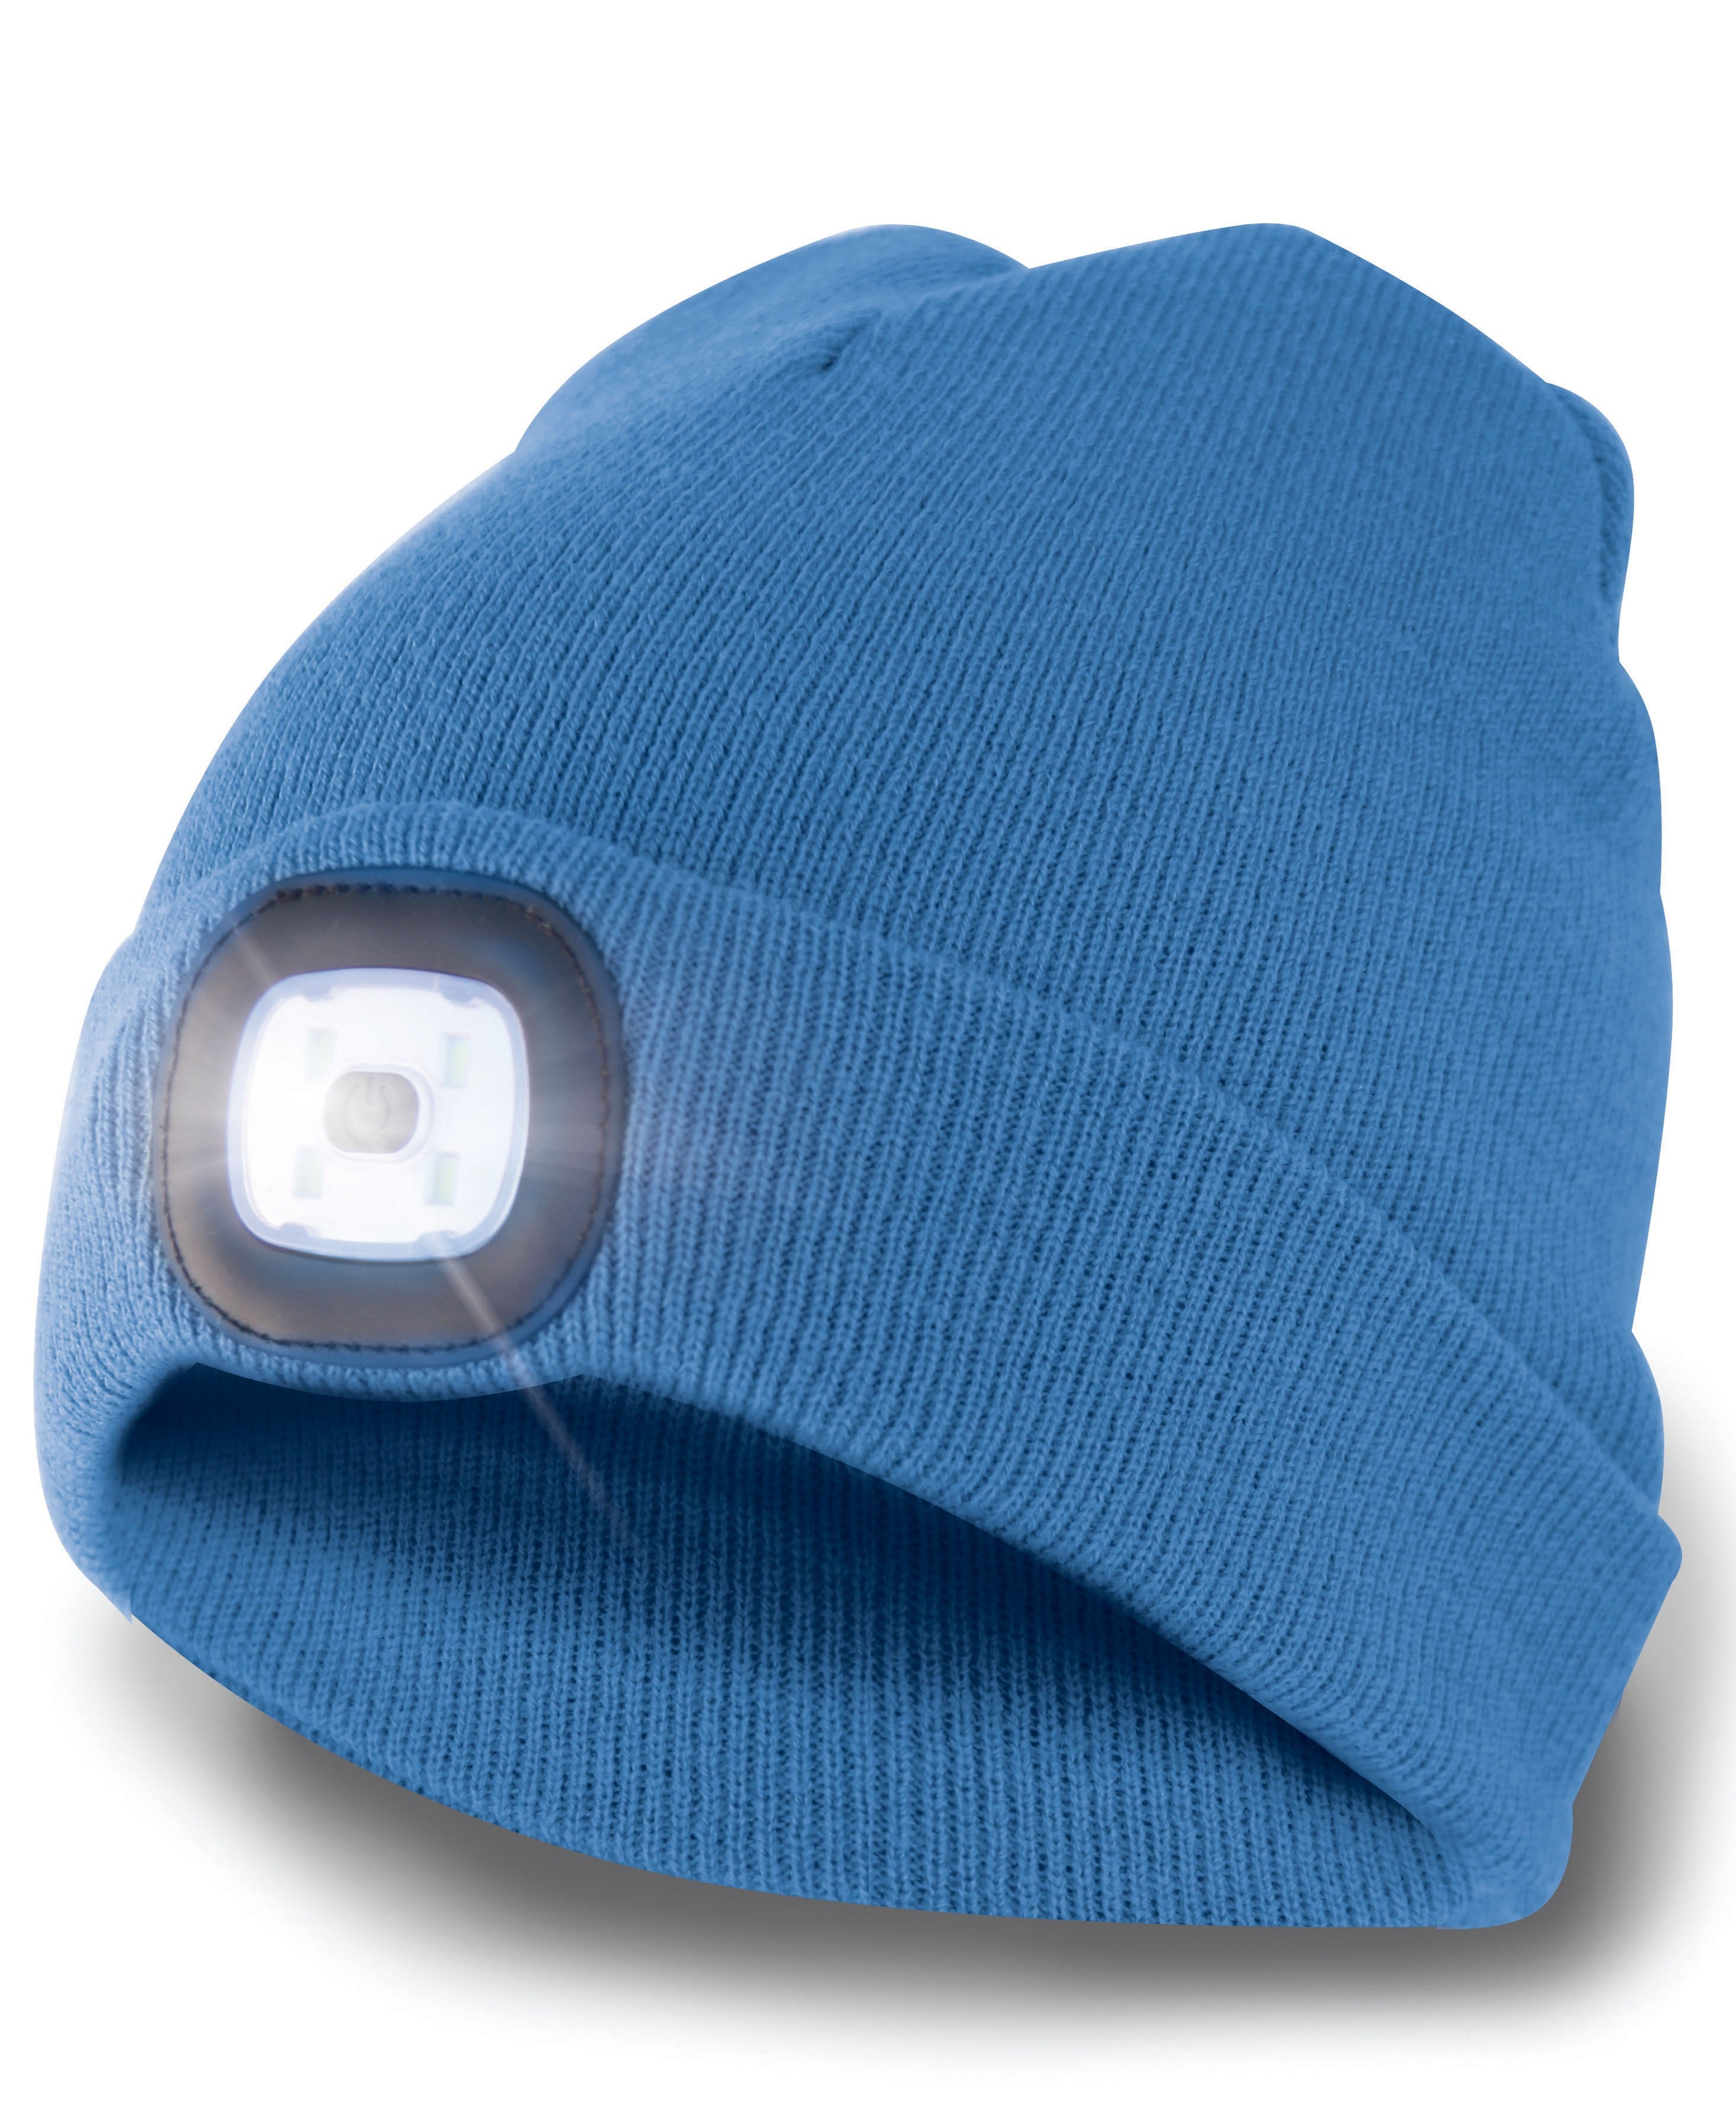 LIGHTHOUSE: cappellino con luce frontale LED ricaricabile. Sky blue